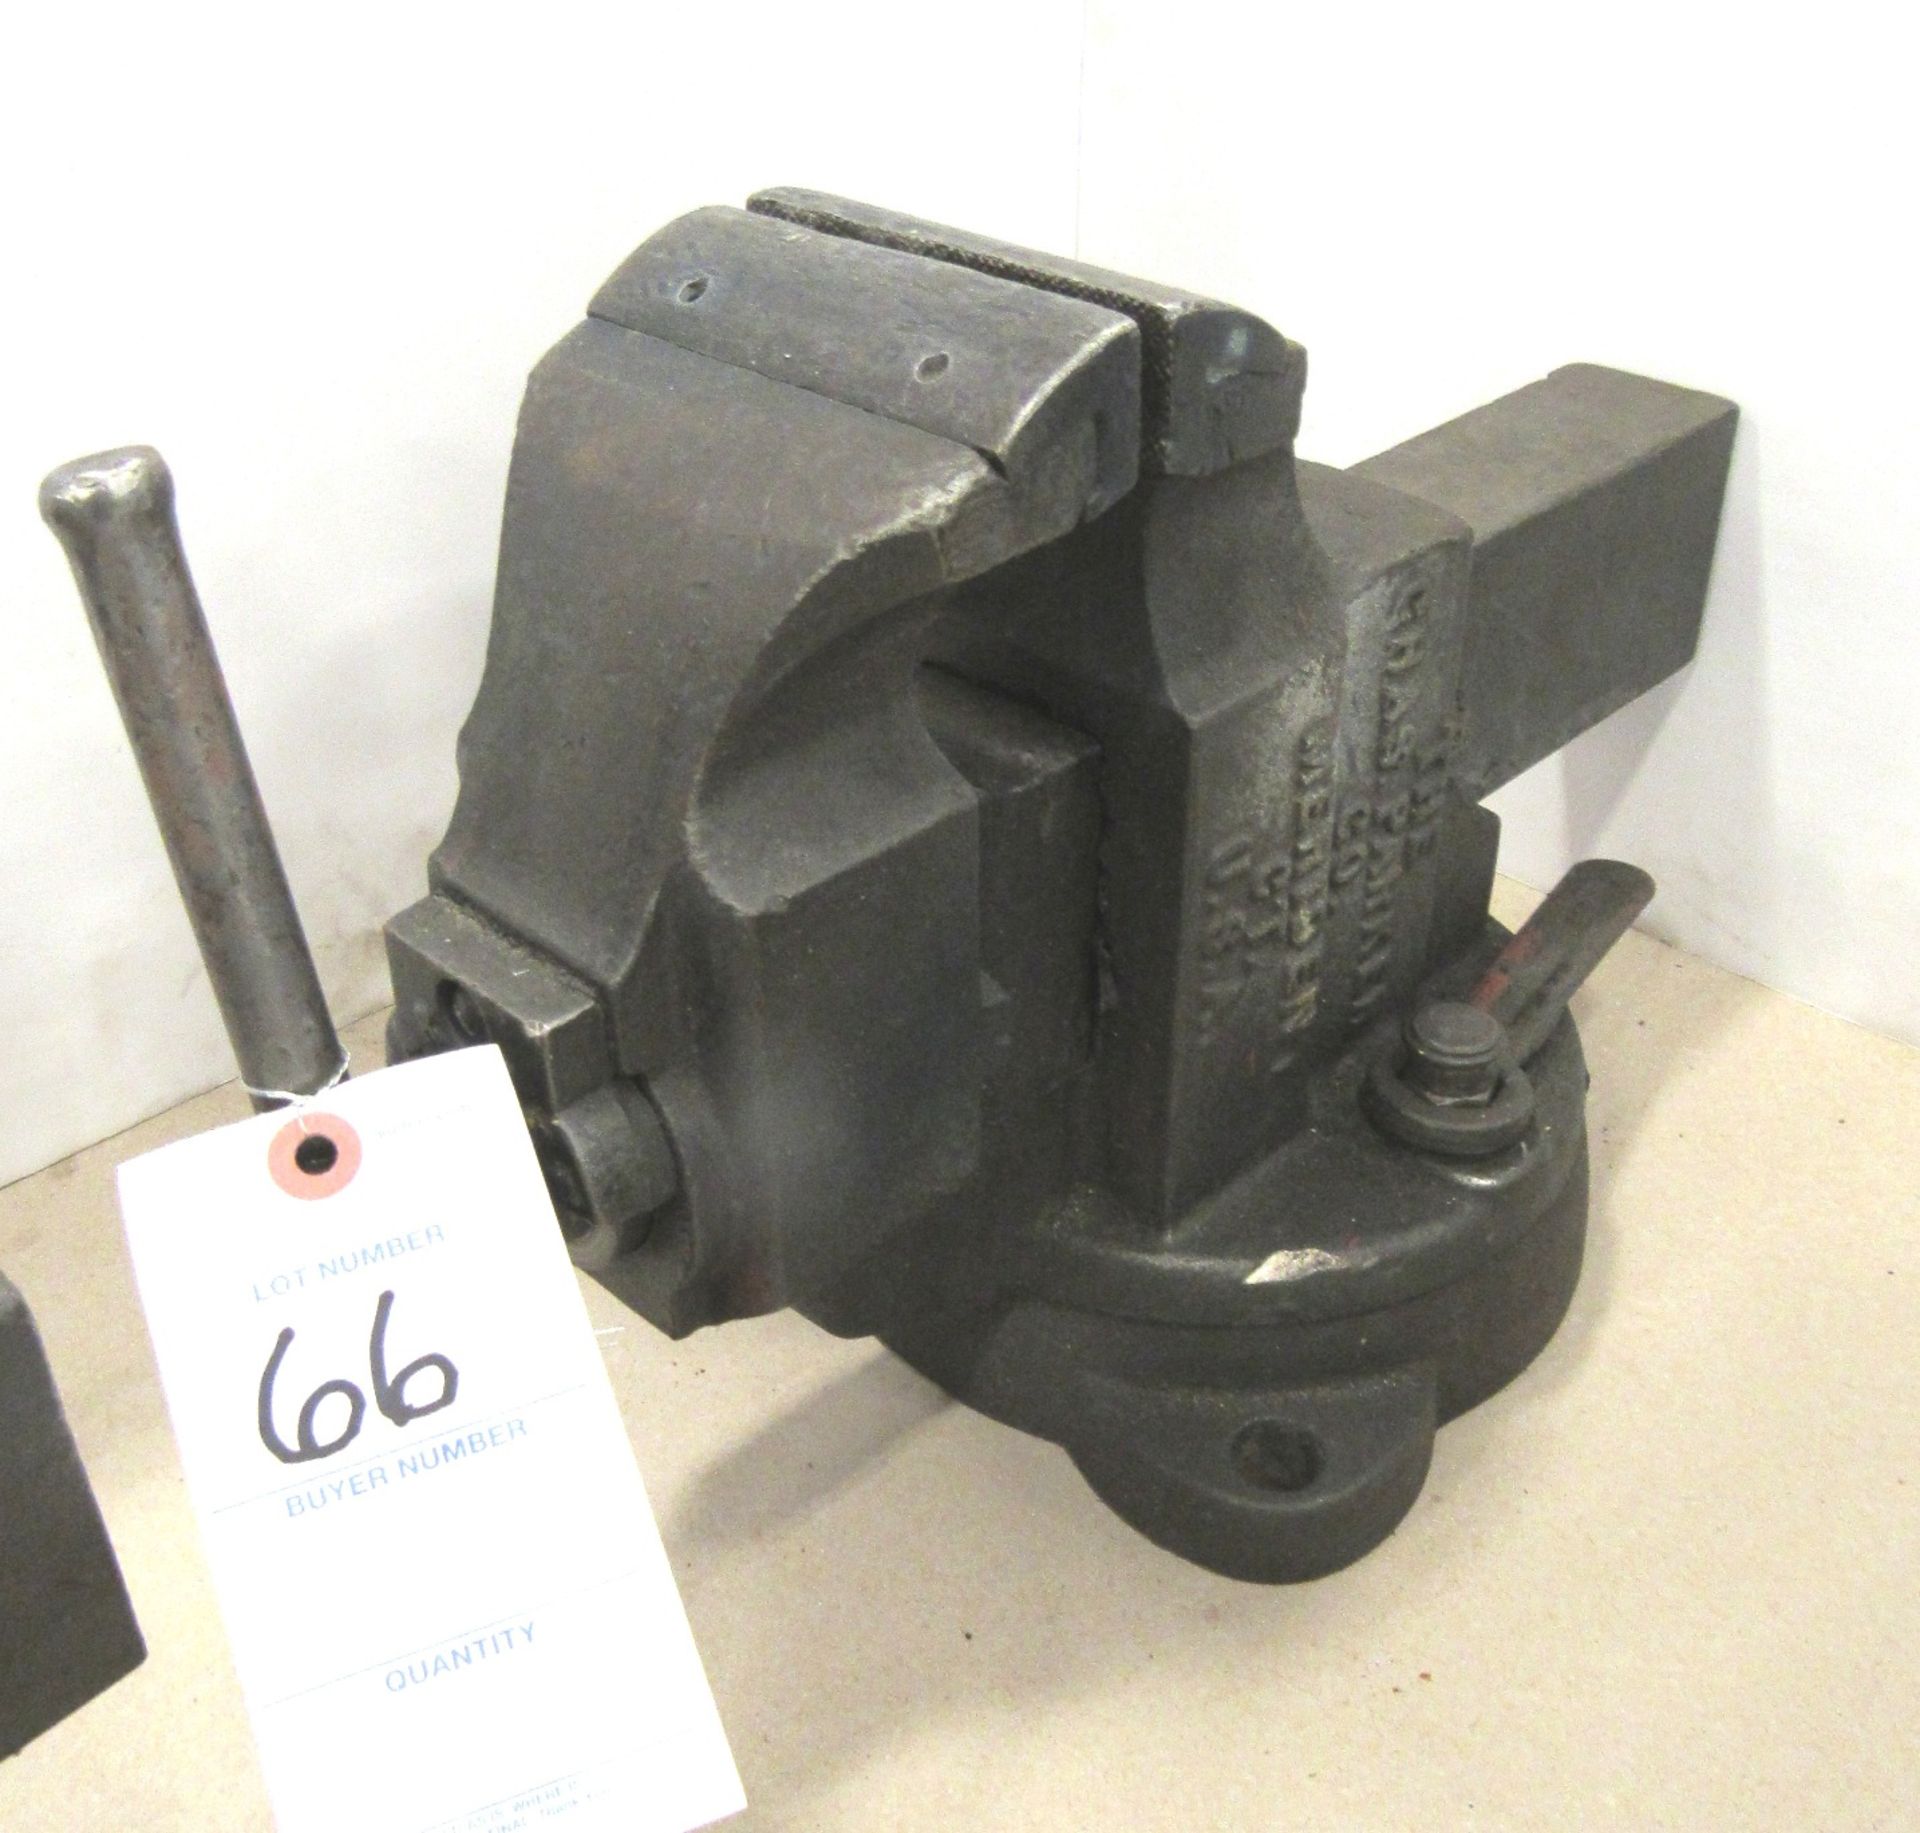 4"Chas Parker No.974 Bench Vise